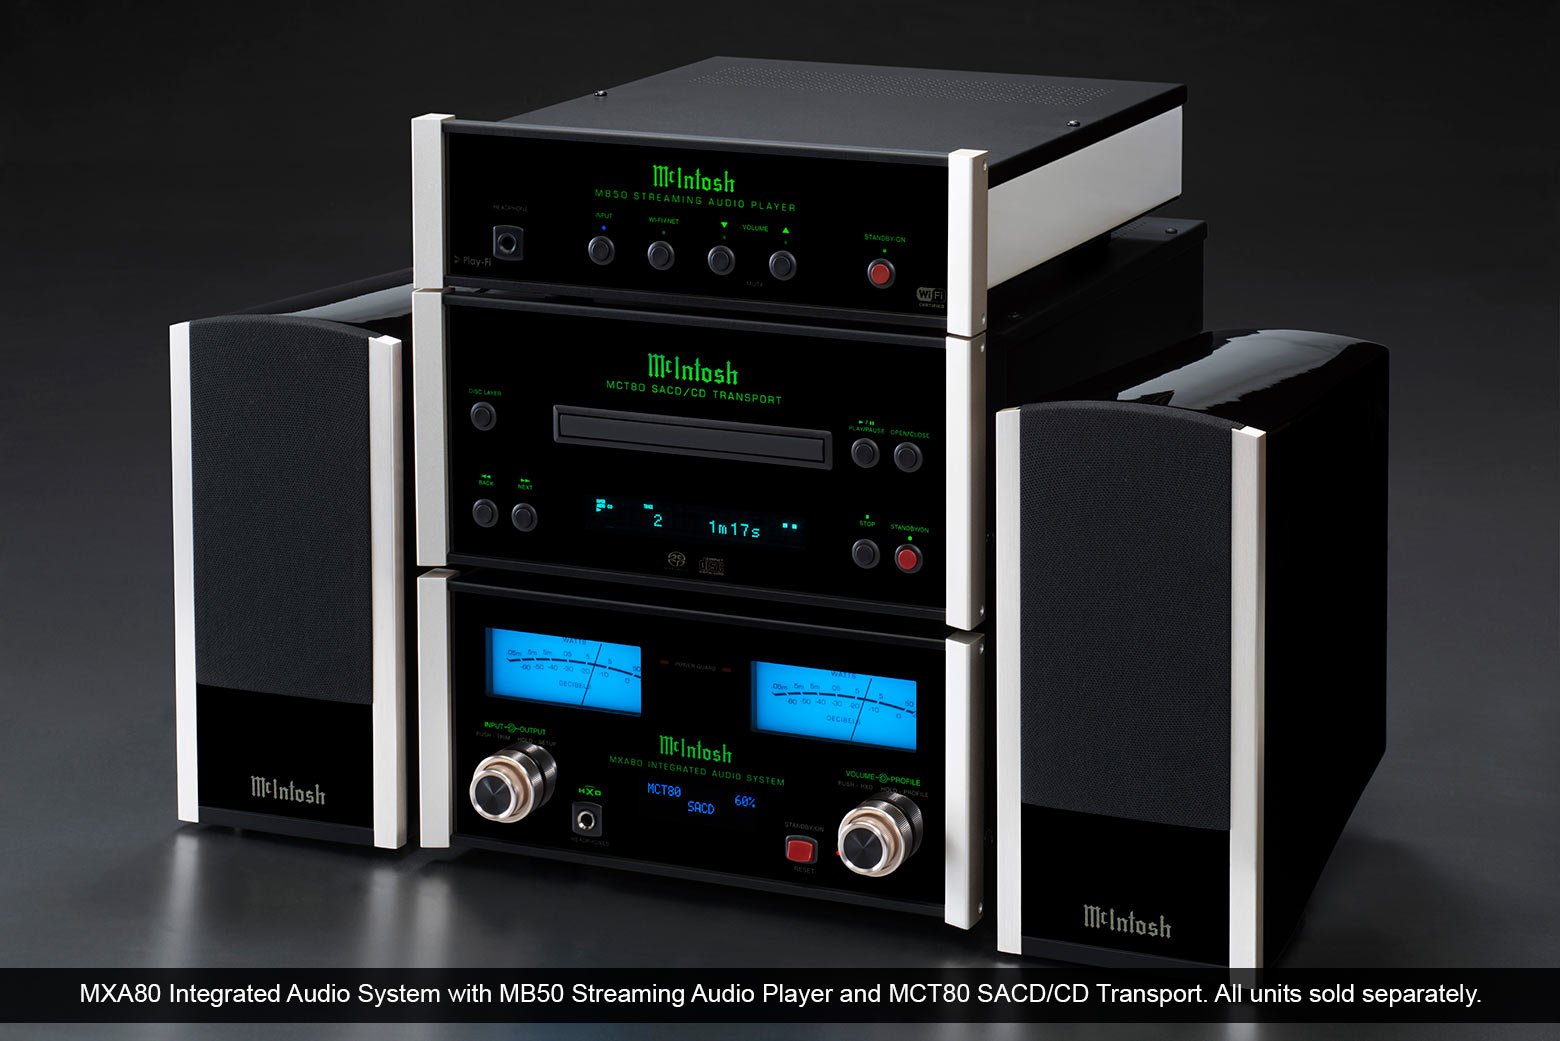 MXA80 Integrated Audio System, MB50 Streaming Audio Player and MCT80 SACD/CD Transport.